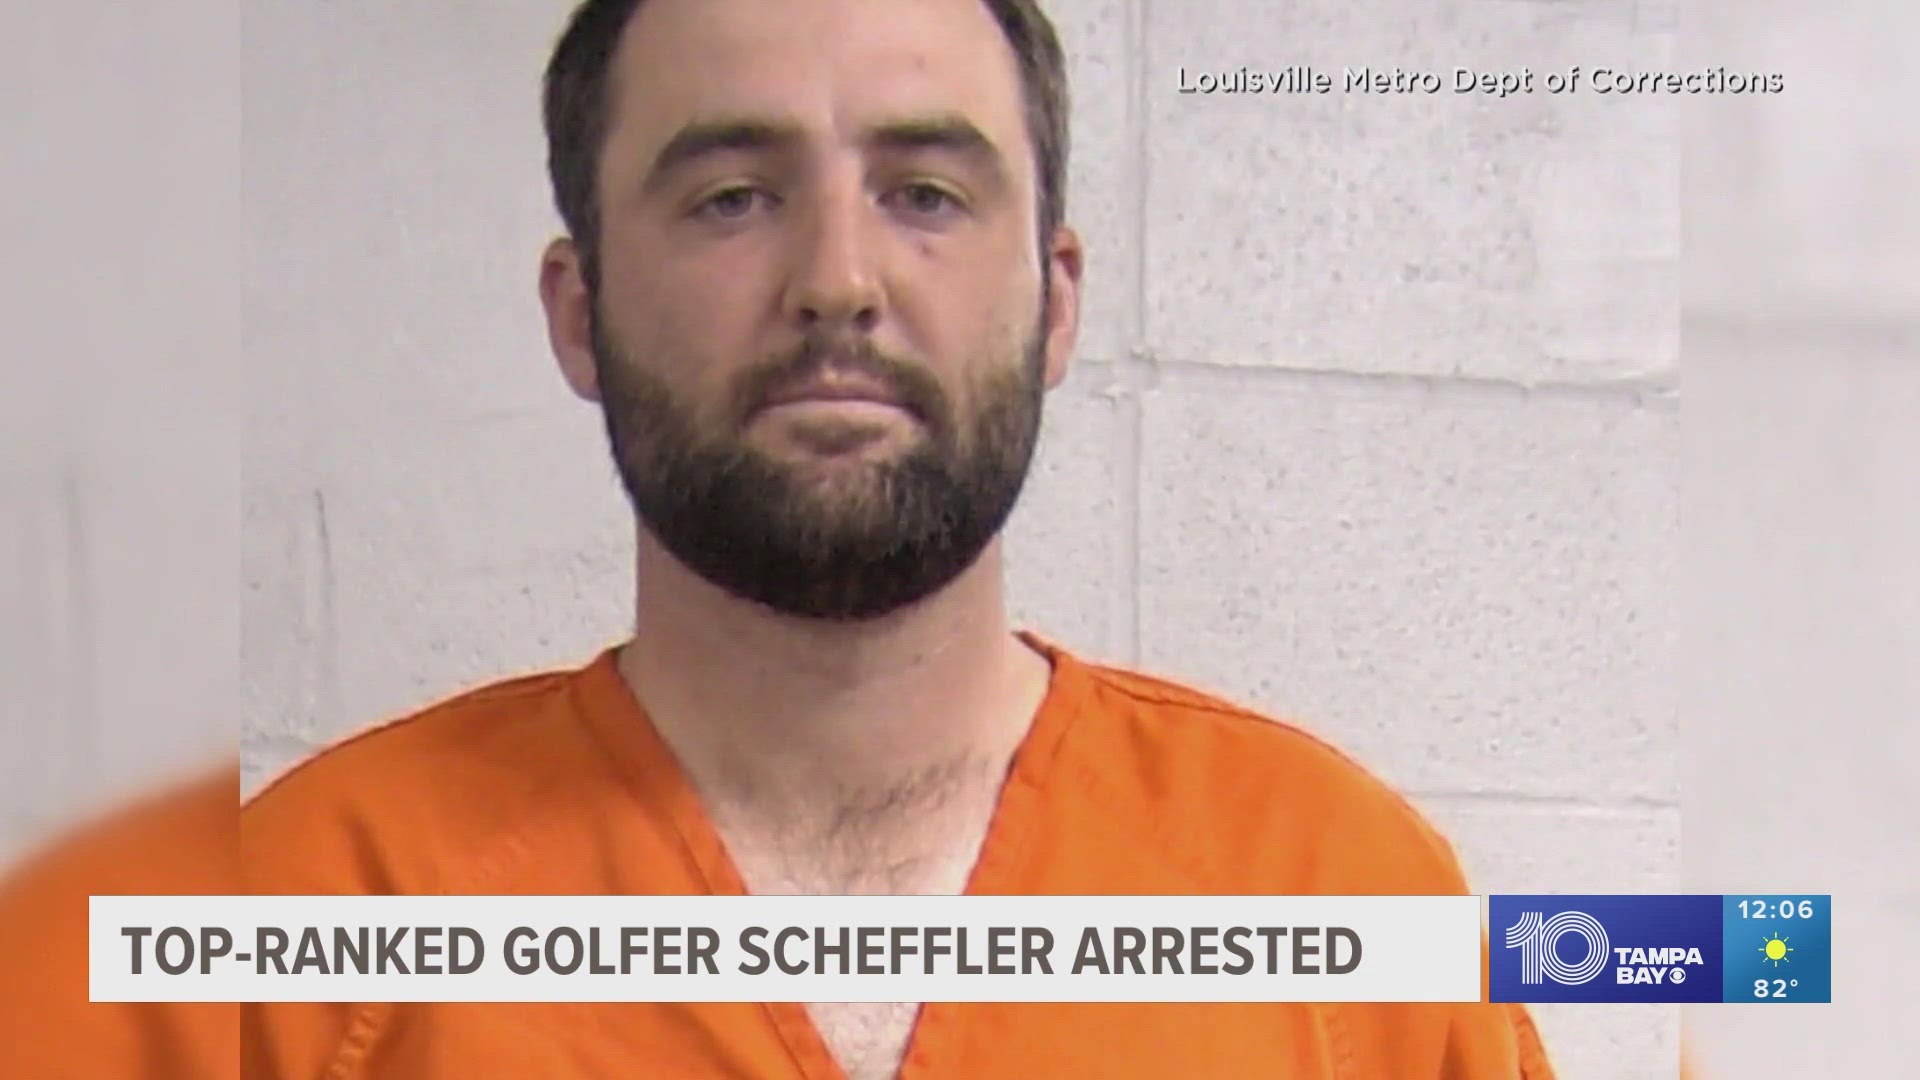 ESPN said Scheffler, who has a morning tee time, drove past a police officer and the officer went after his car screaming at him.